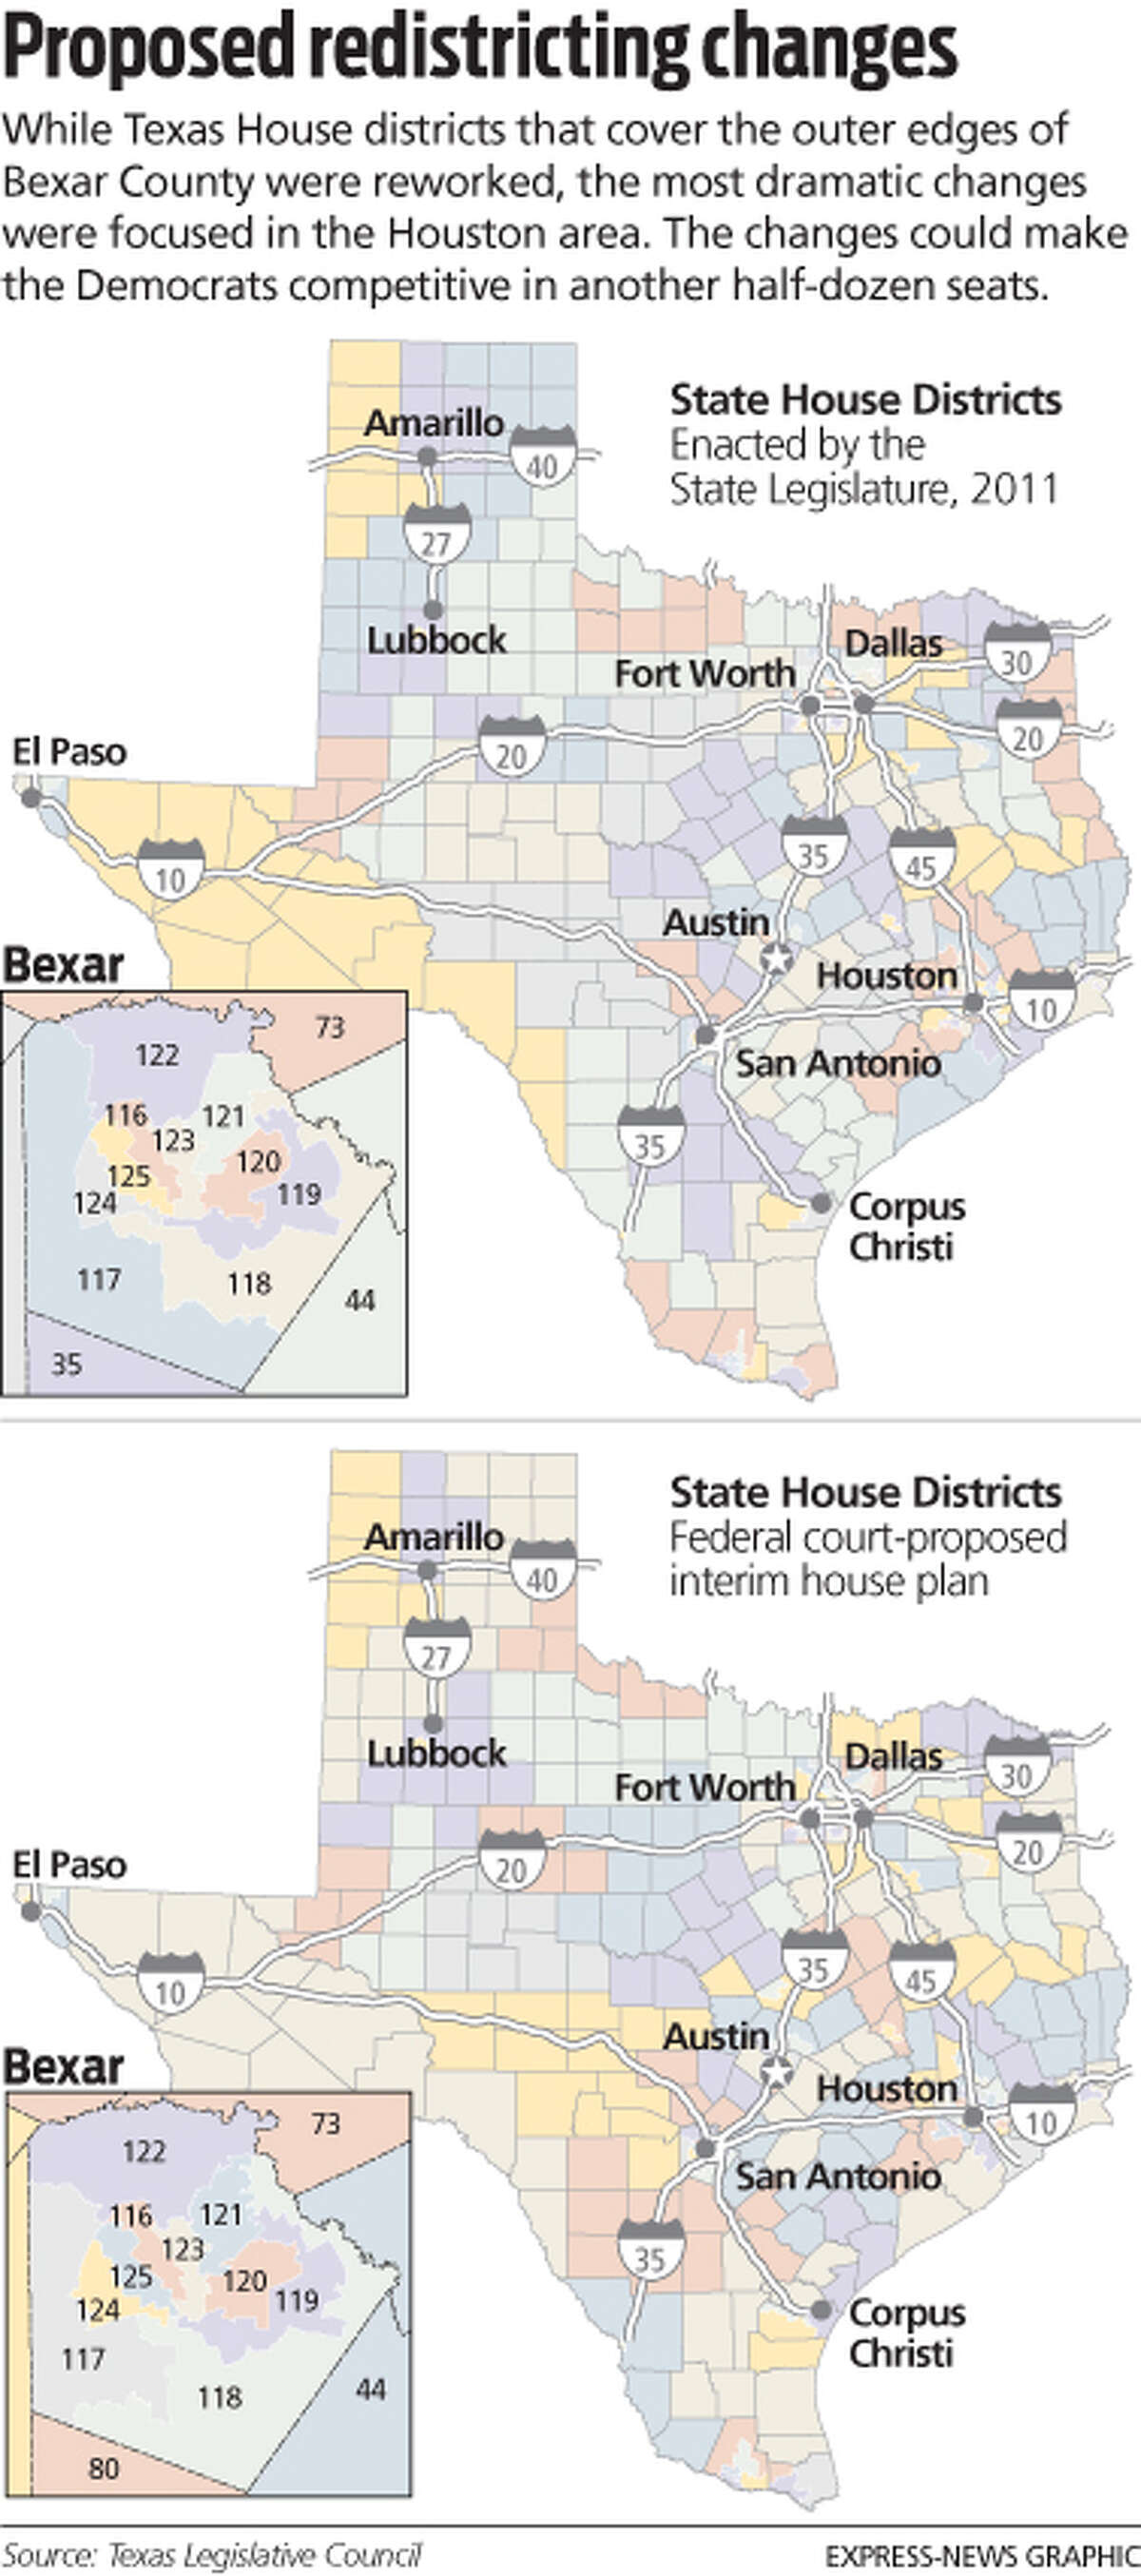 Proposed redistricting change to Texas state house districts